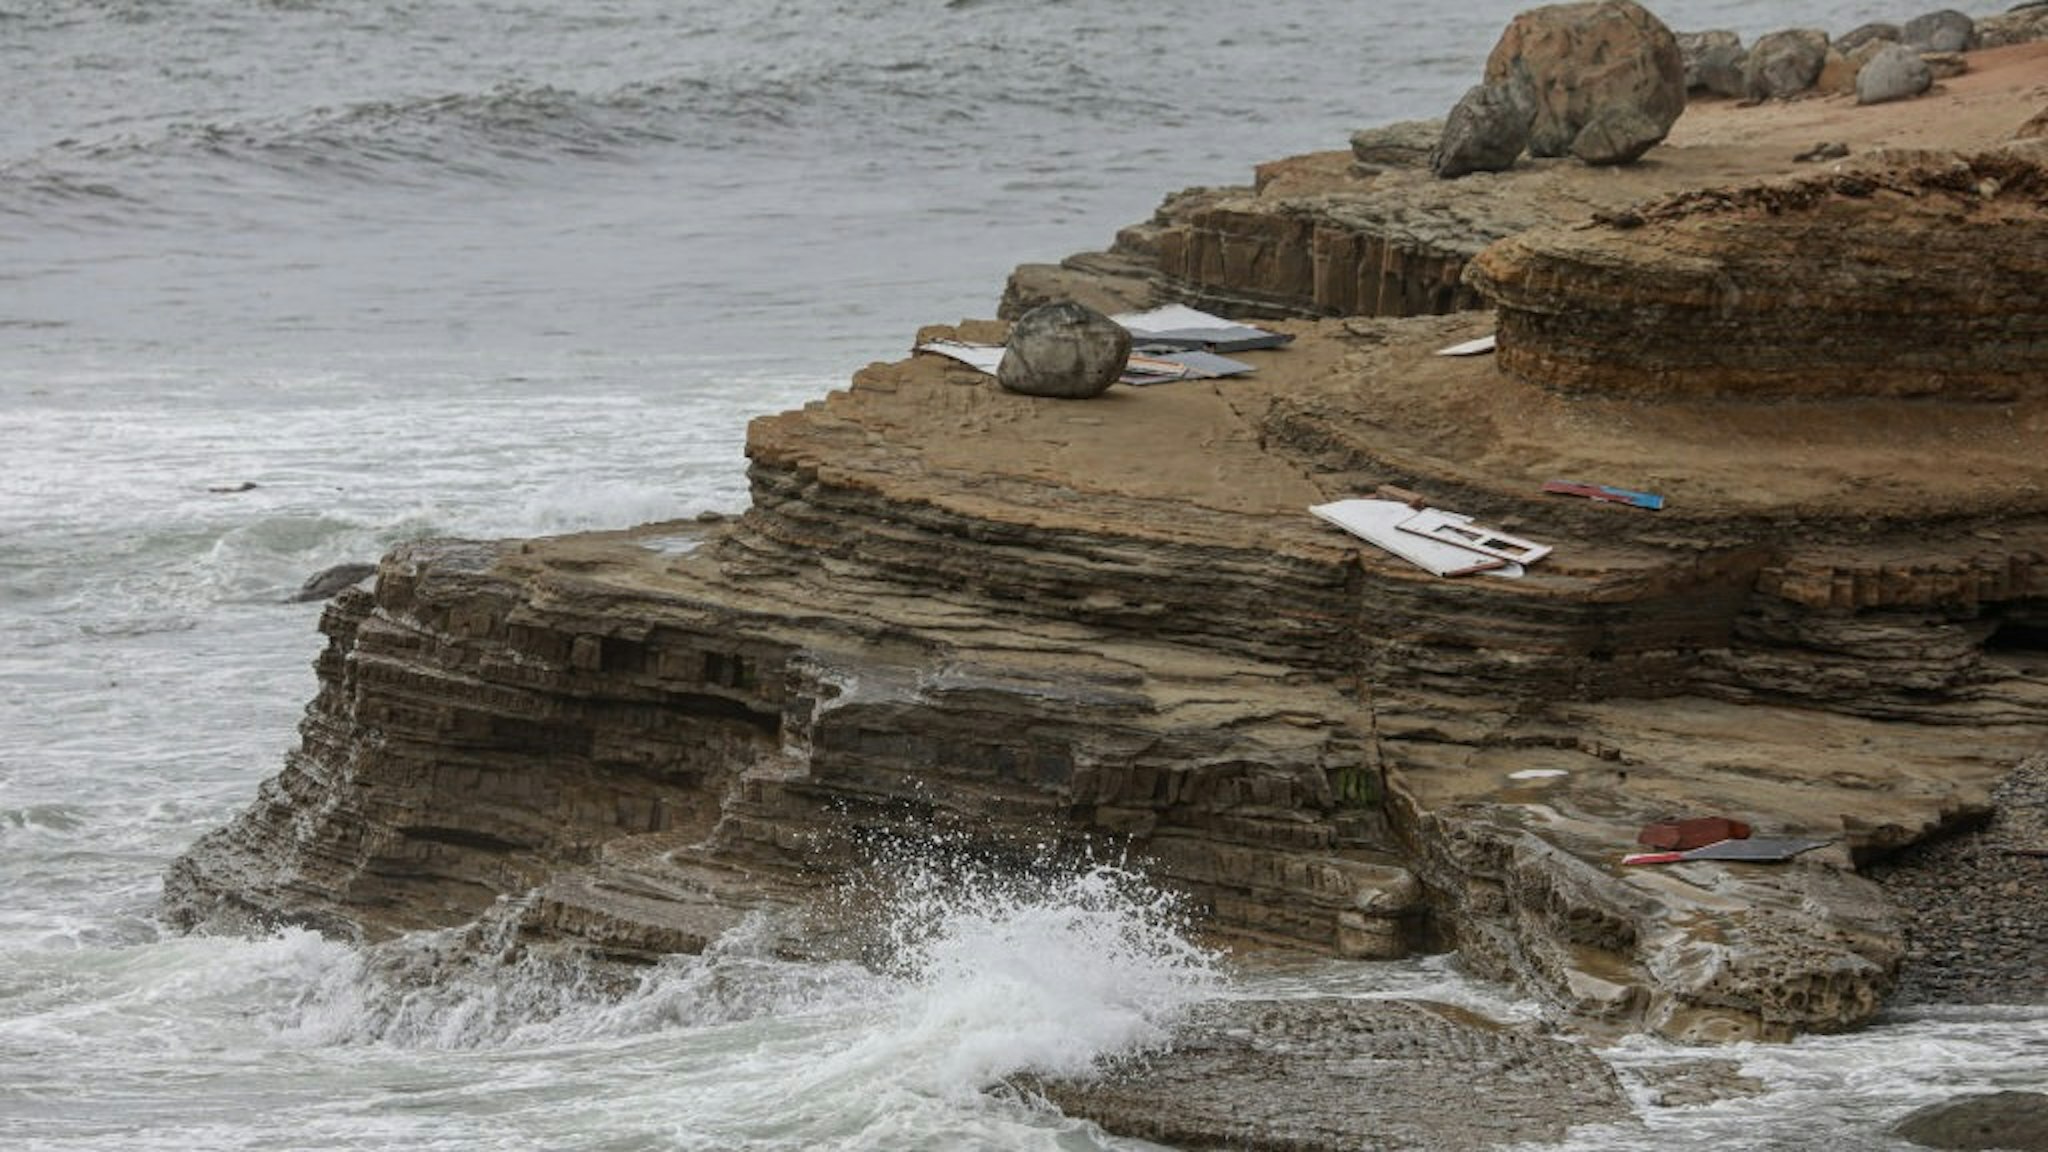 SAN DIEGO, CA - MAY 02: Debris is littered along the shoreline off Cabrillo Monument on May 2, 2021 in San Diego, California. Two people died and Twenty were rescued after a vessel overturned on Sunday afternoon off Point Loma area of San Diego(Photo by Sandy Huffaker/Getty Images)